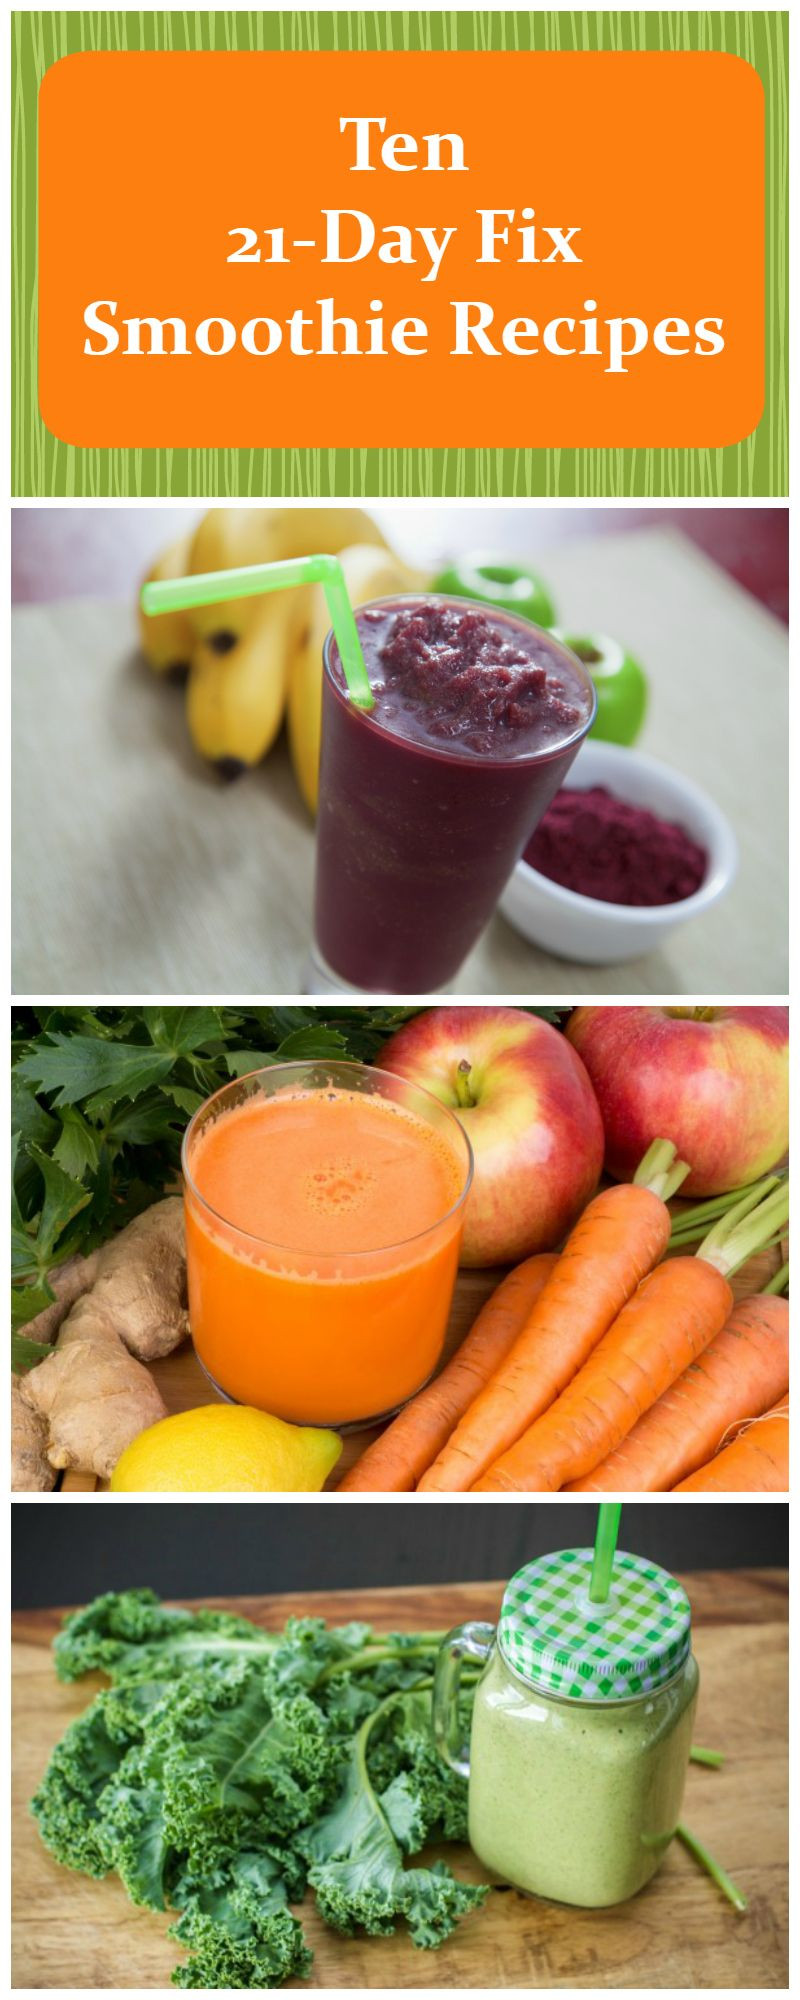 Diet Smoothie Recipes
 How to Make Smoothies for the 21 Day Fix